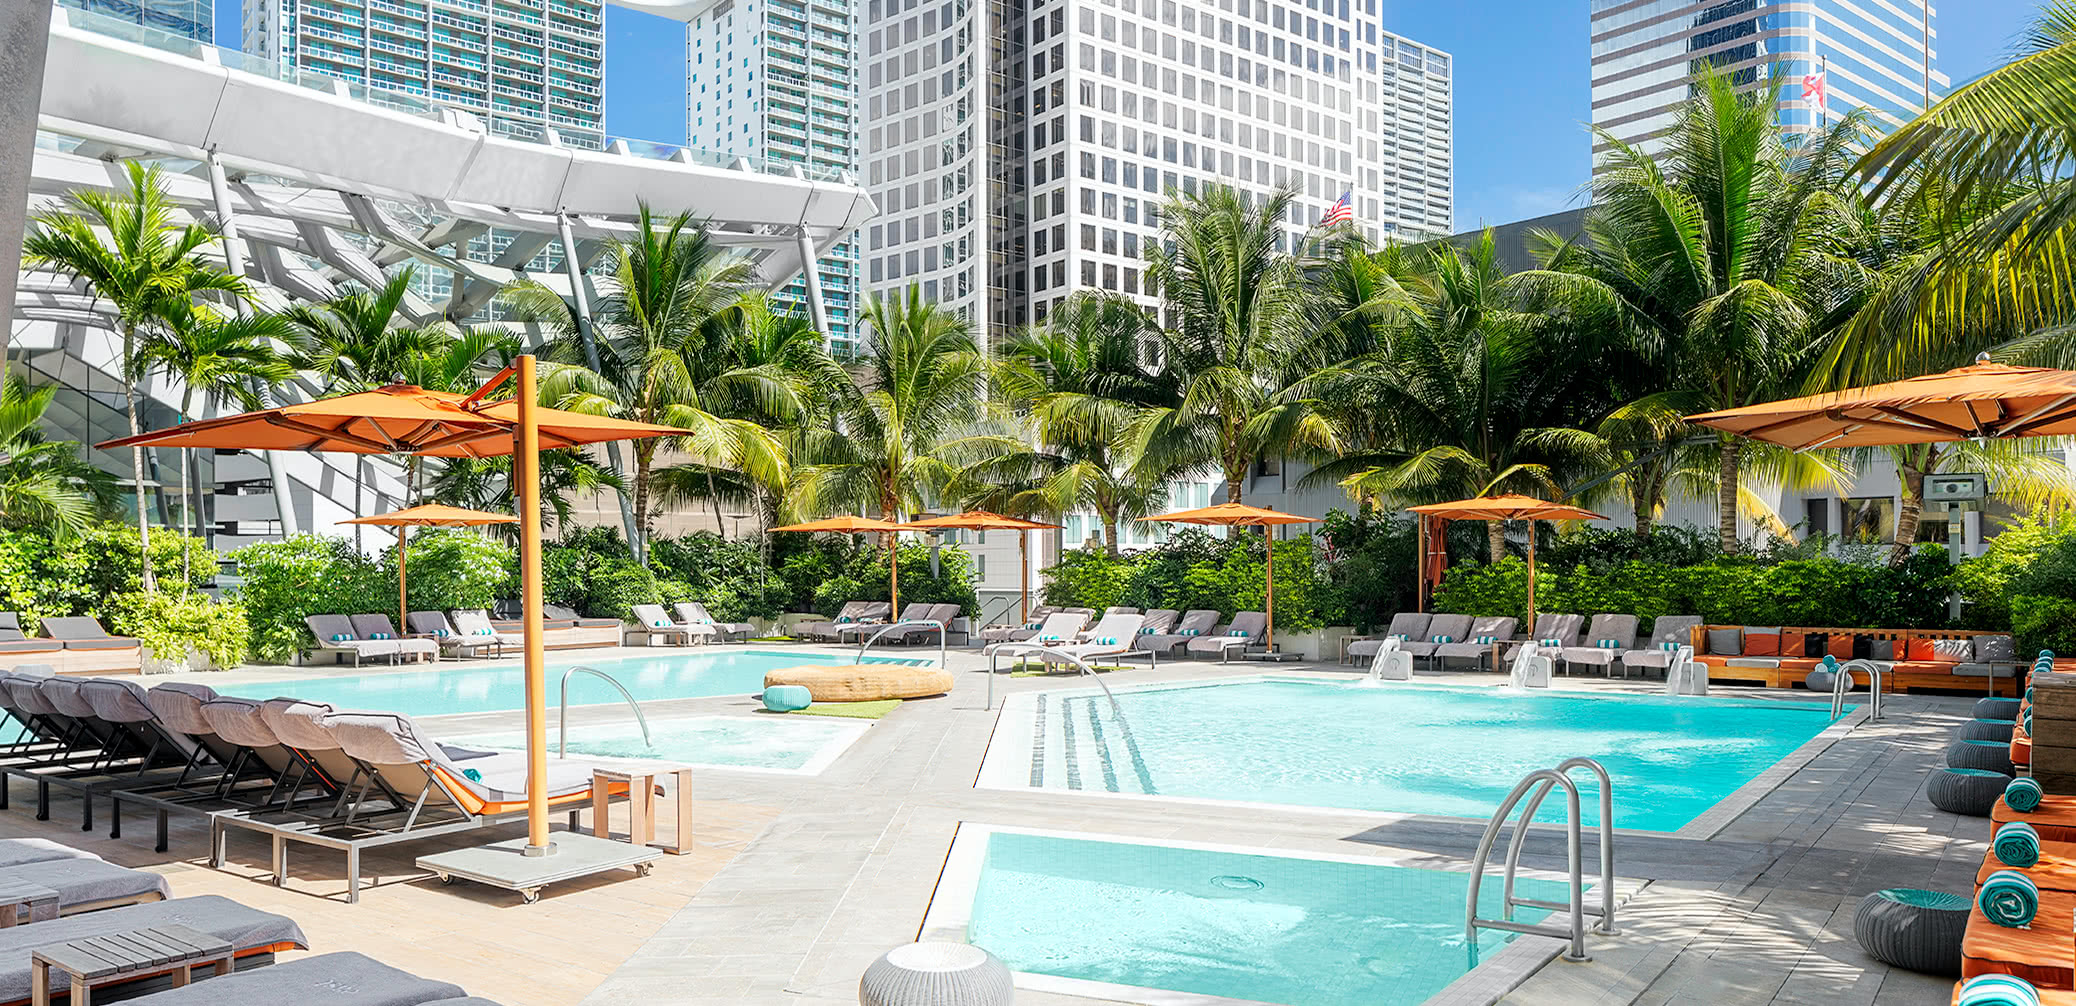 Best Luxury Hotels In DownTown Miami